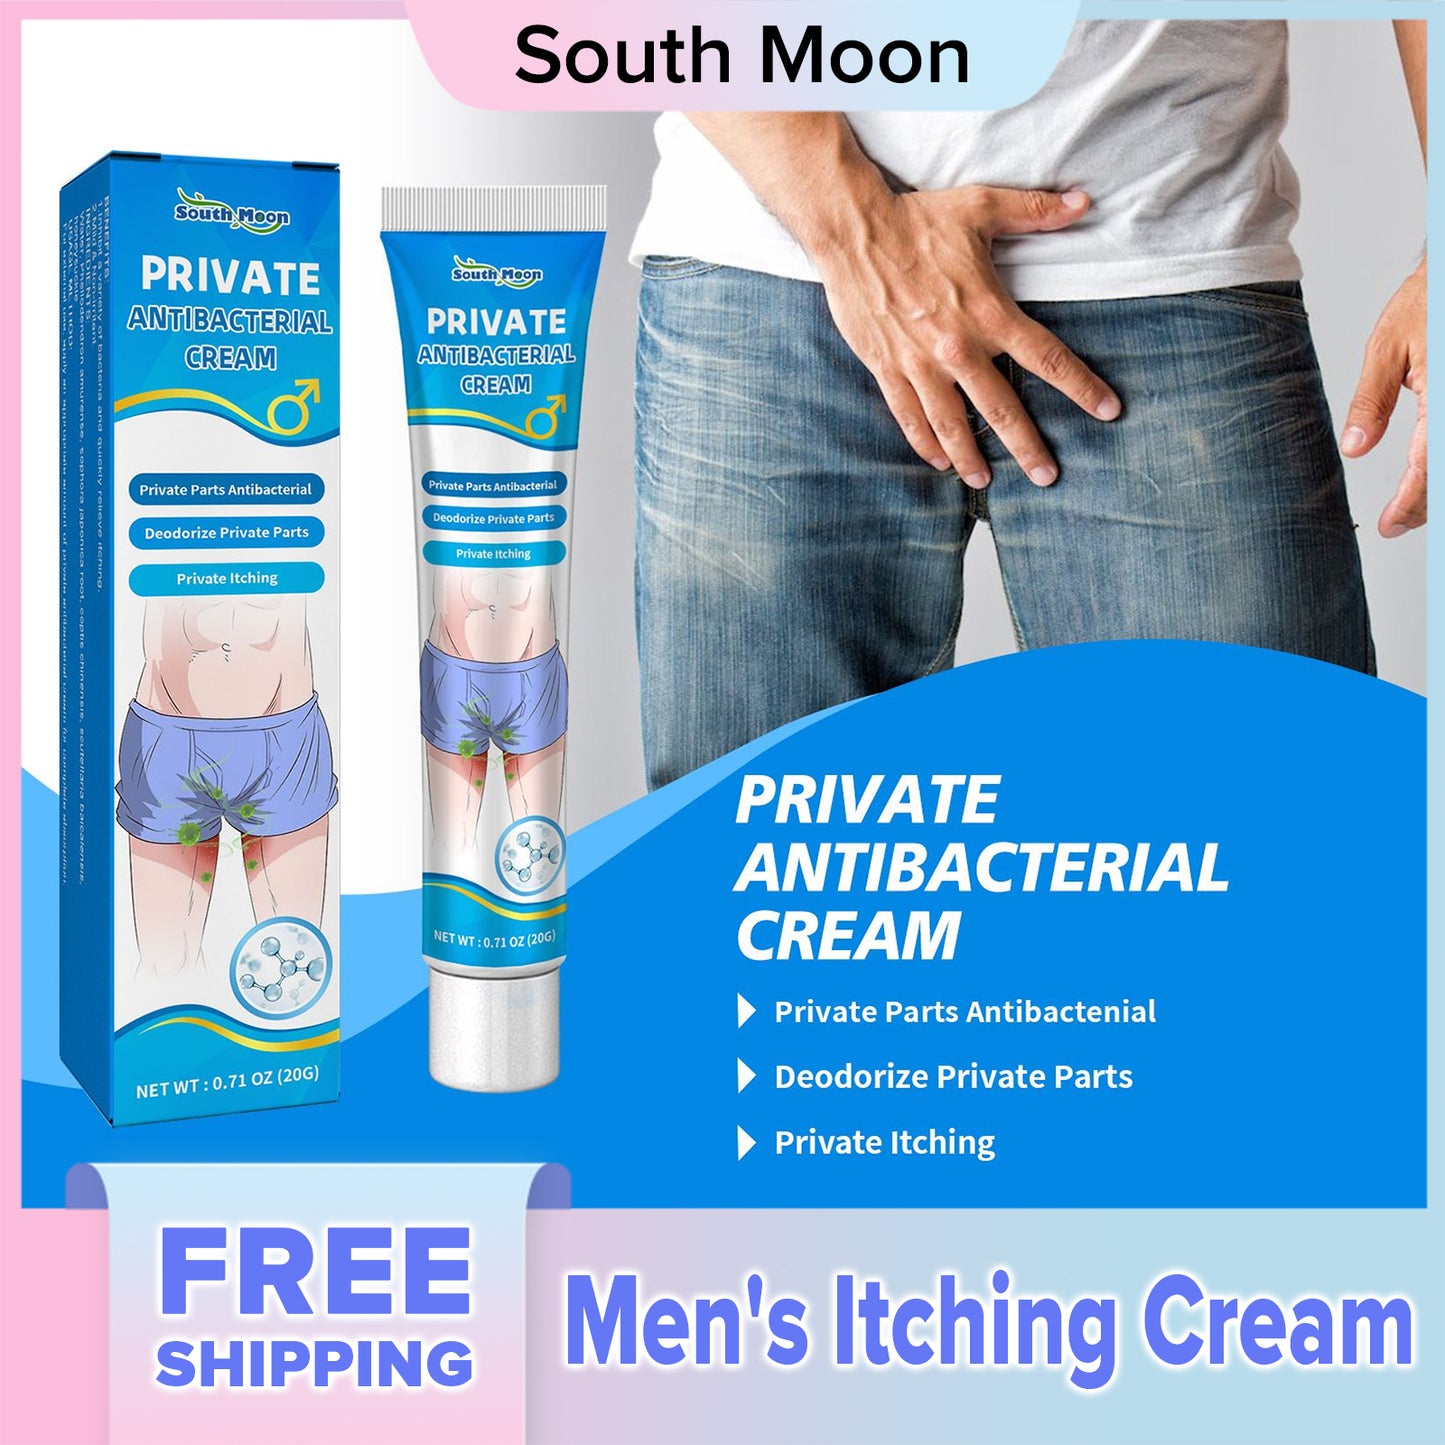 South Moon Men's Itching Cream For Private Itching, Dry Itching, Refreshing And Gentle External Use Apply Skin Care Cream(20g)